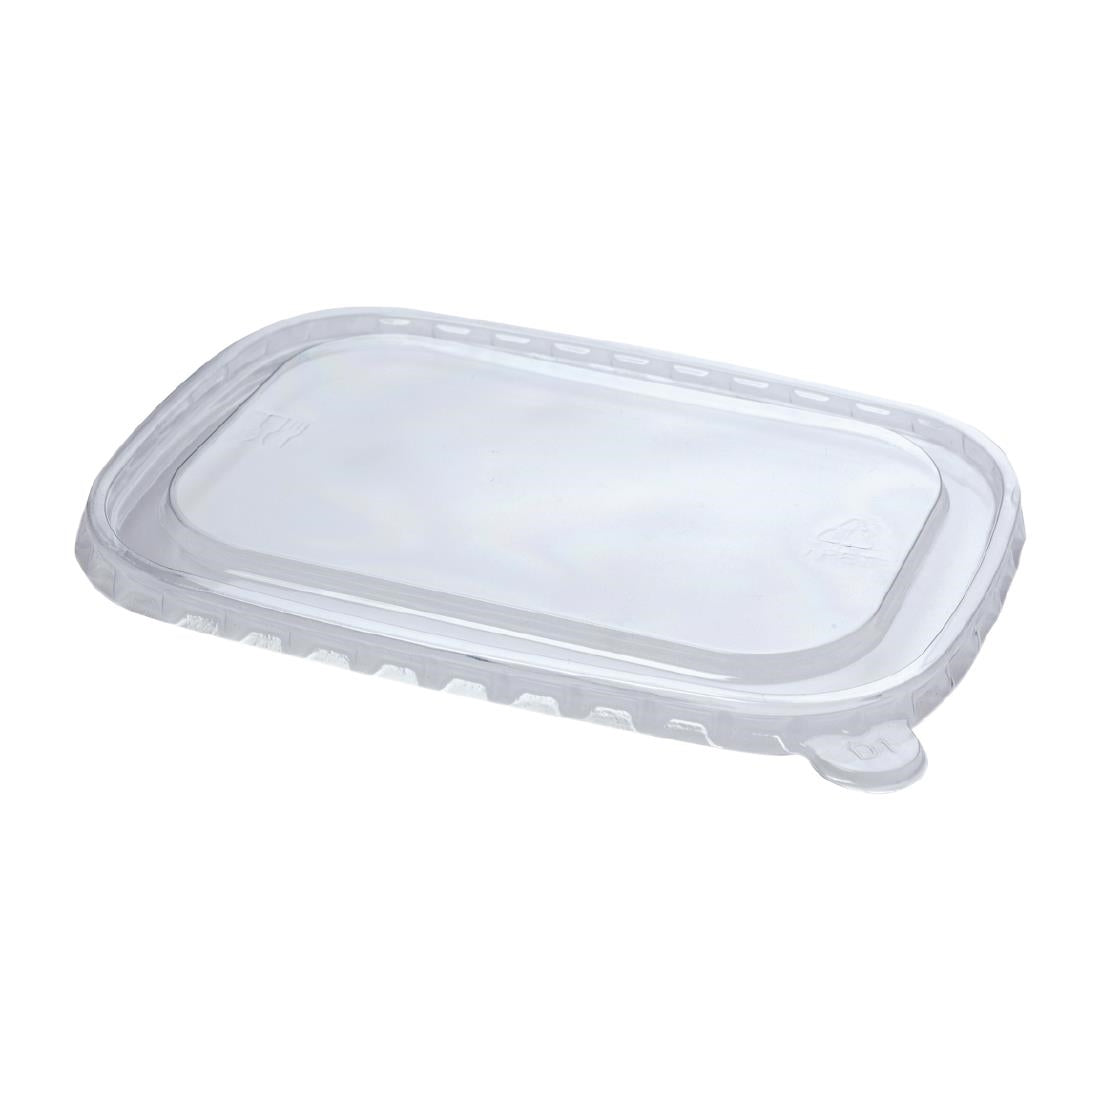 FP456 Colpac Stagione rPET Anti-Mist Food Box Lids (Pack of 300) JD Catering Equipment Solutions Ltd